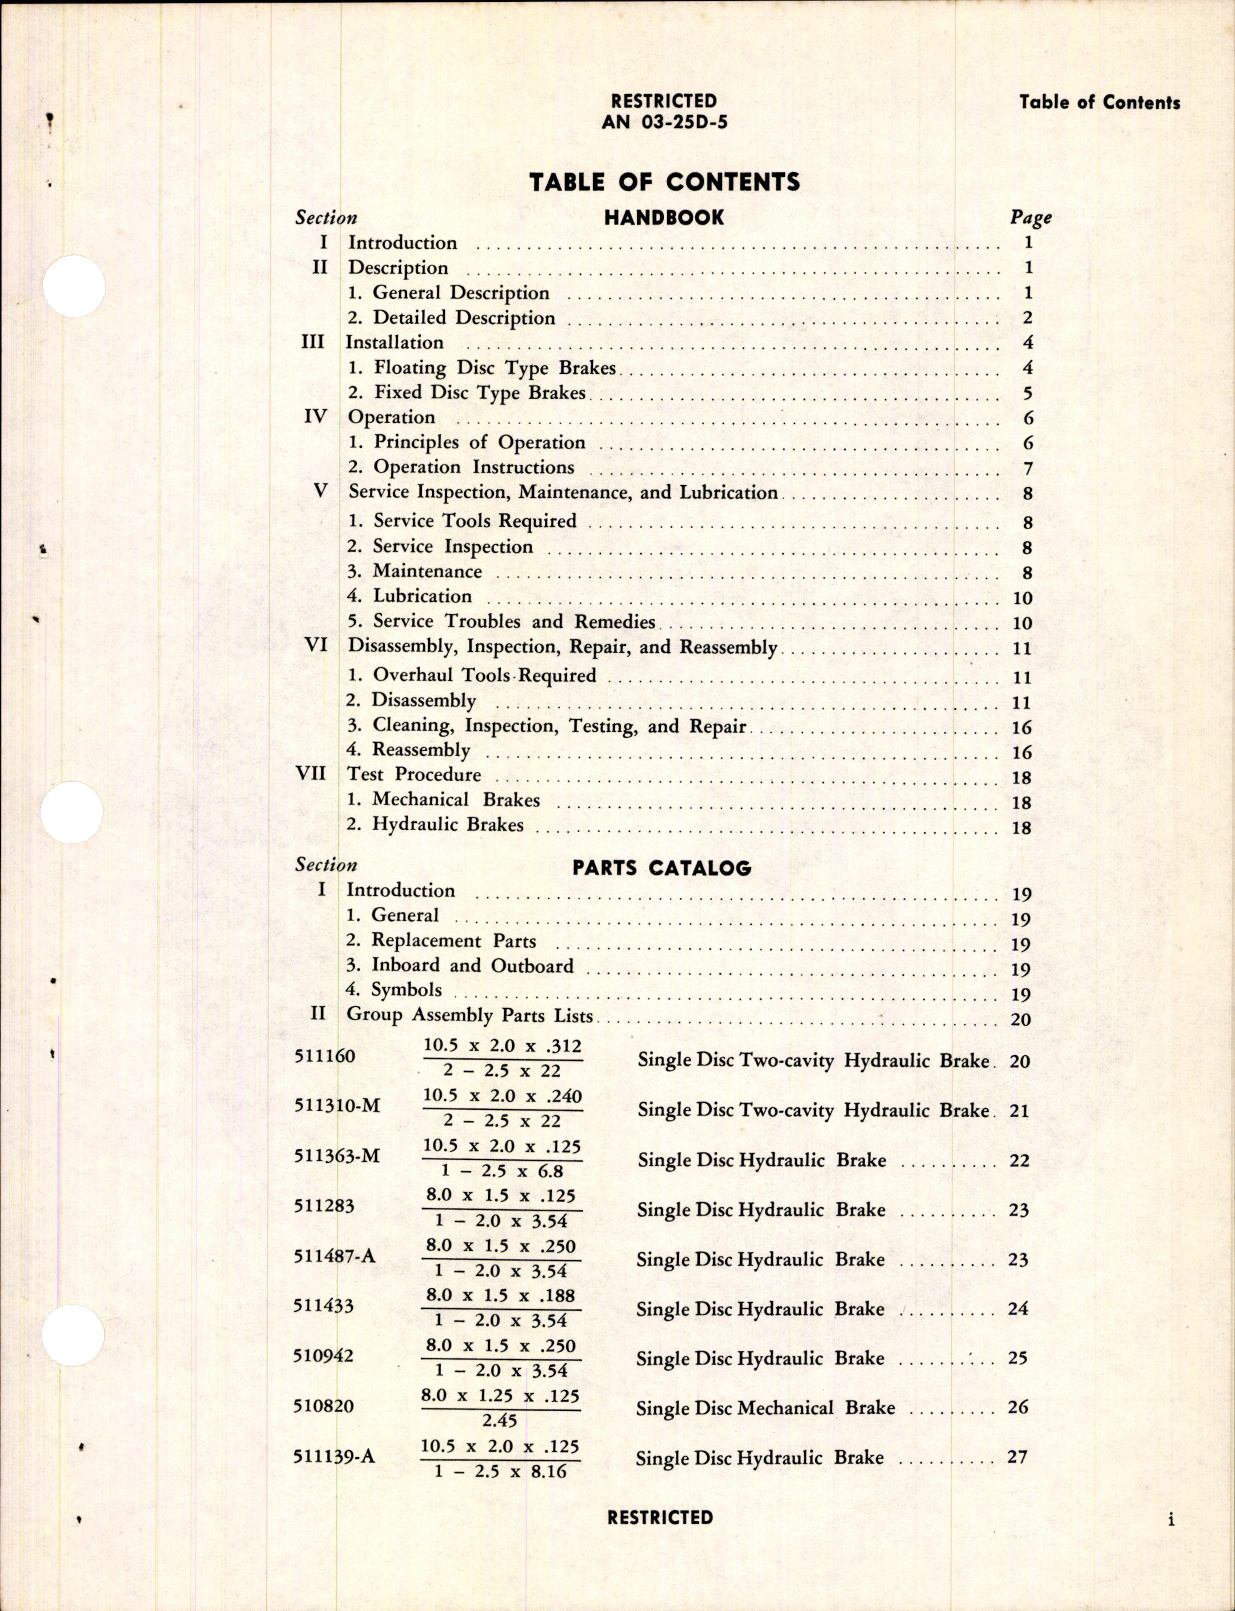 Sample page 3 from AirCorps Library document: Instructions with Parts Catalog for Single Disk Brakes